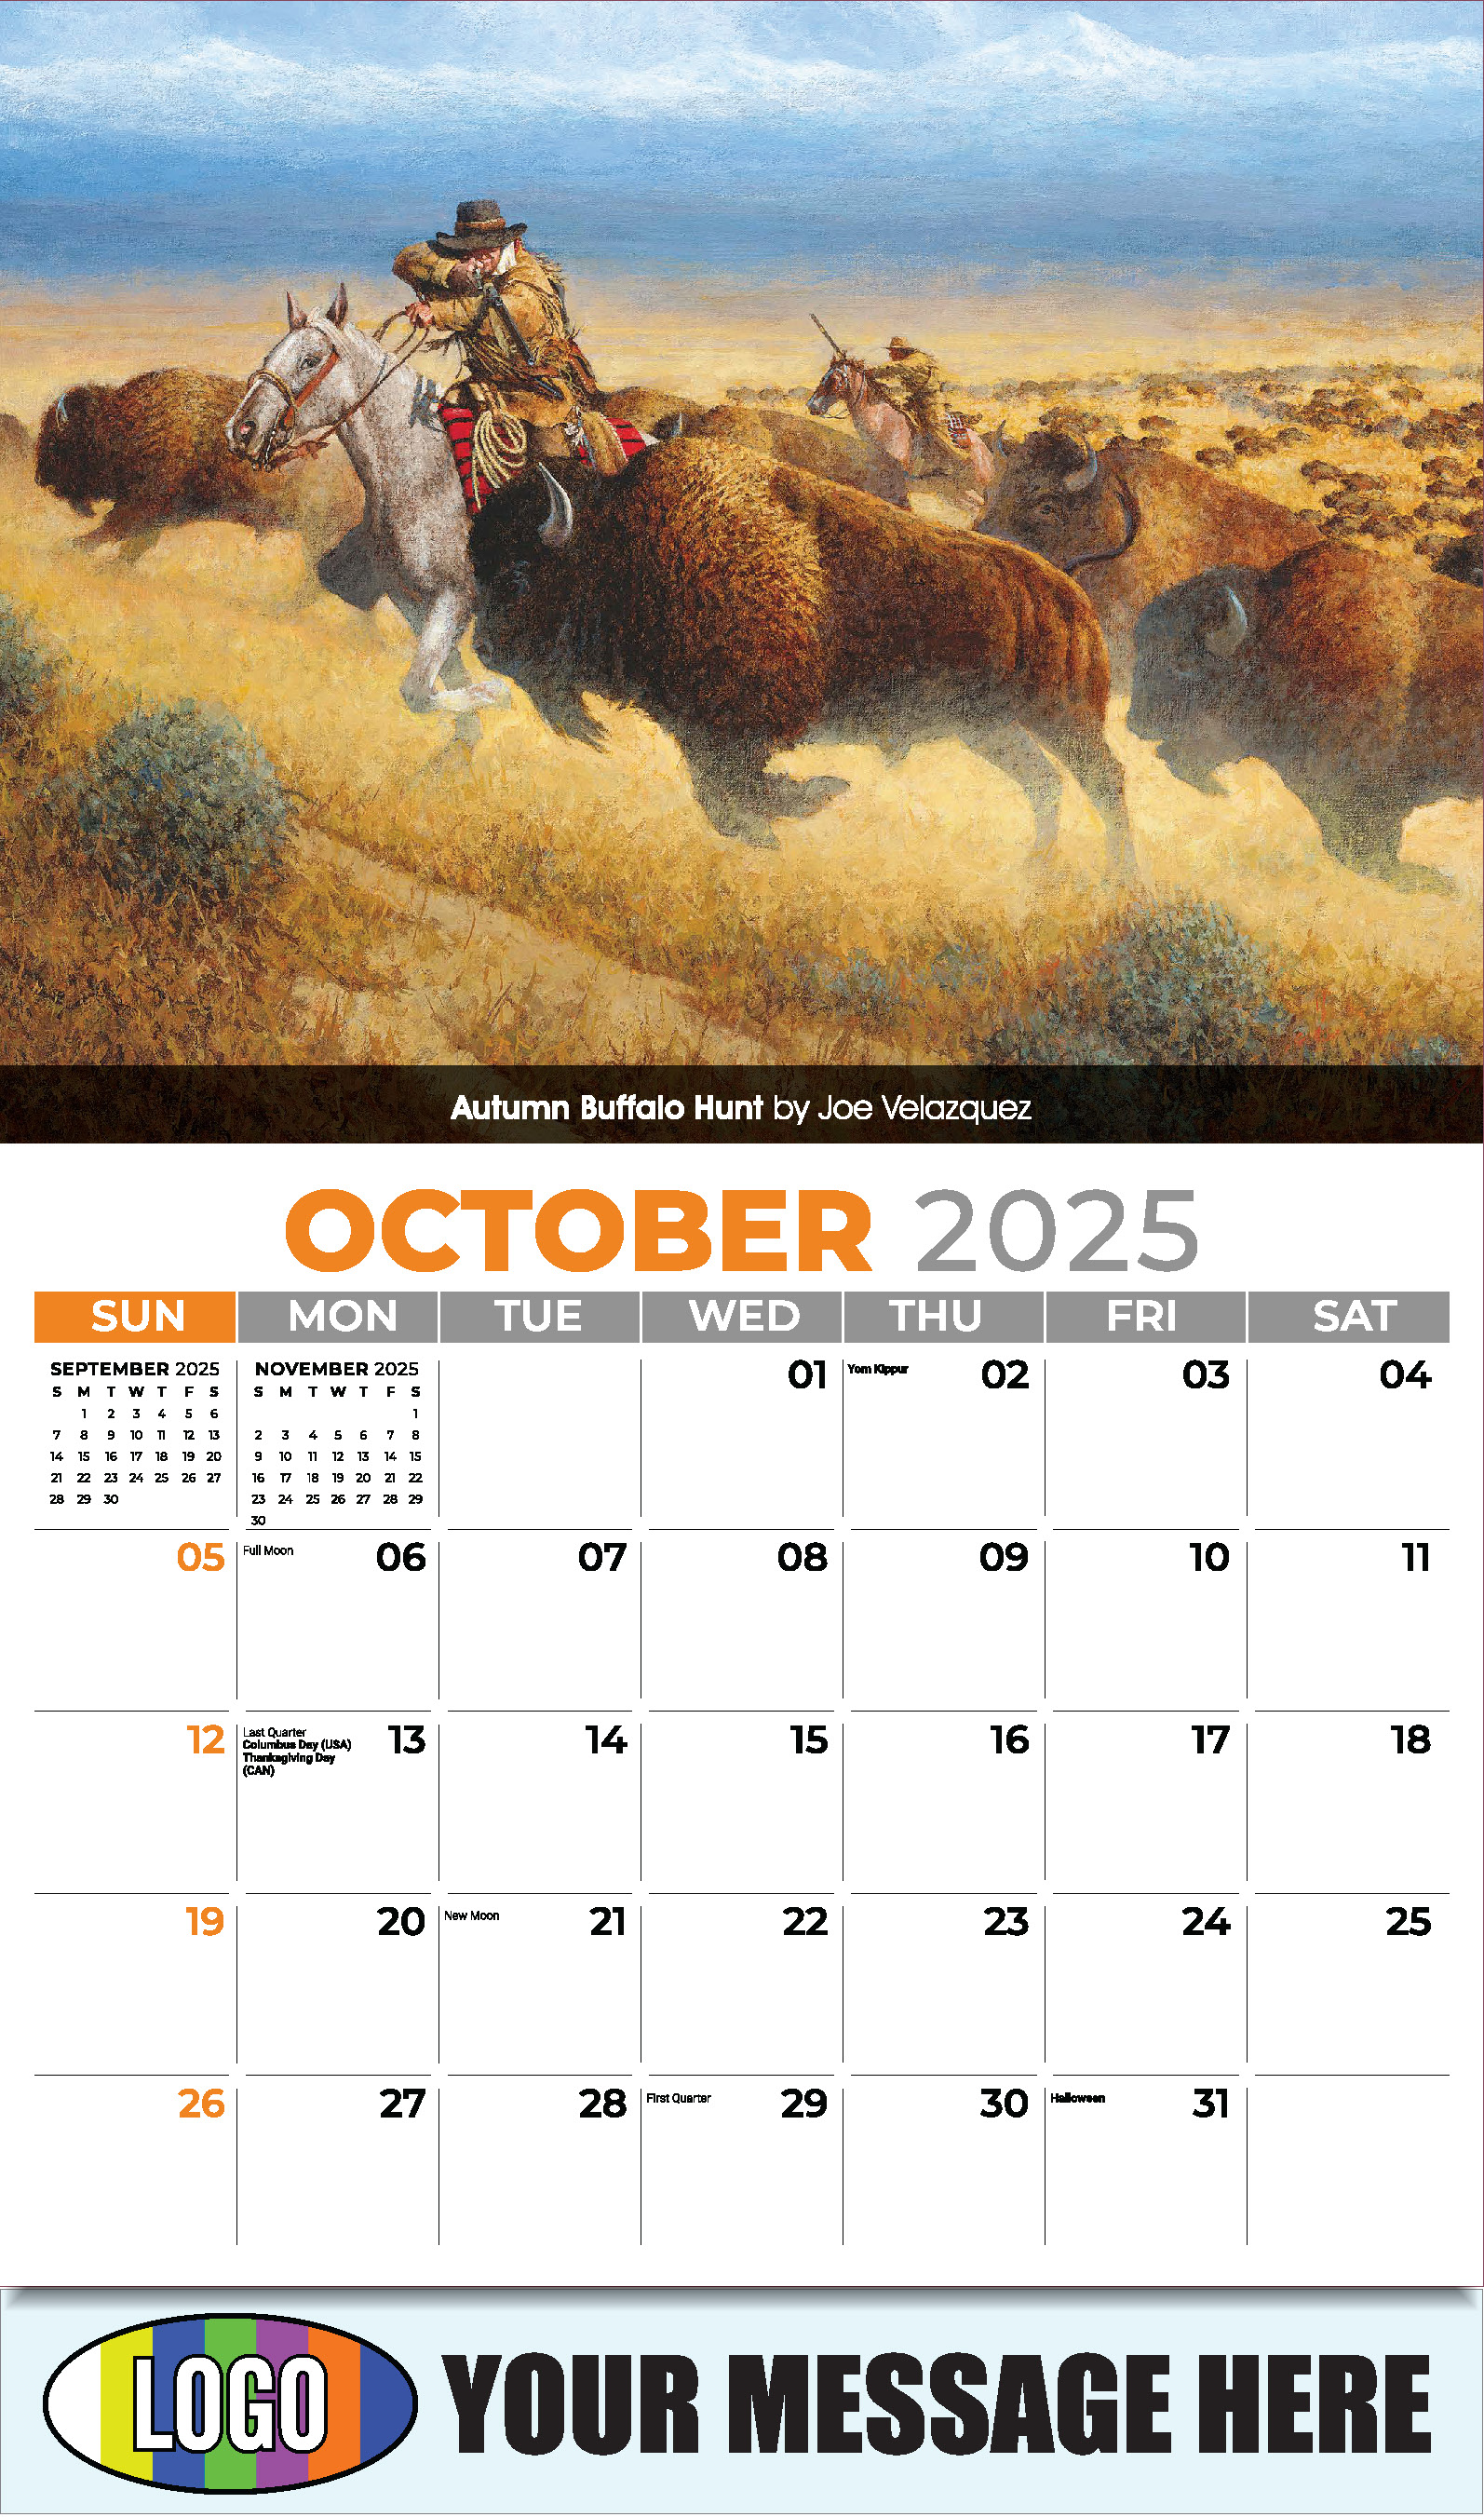 Spirit of the Old West 2025 Old West Art Business Promo Wall Calendar - October